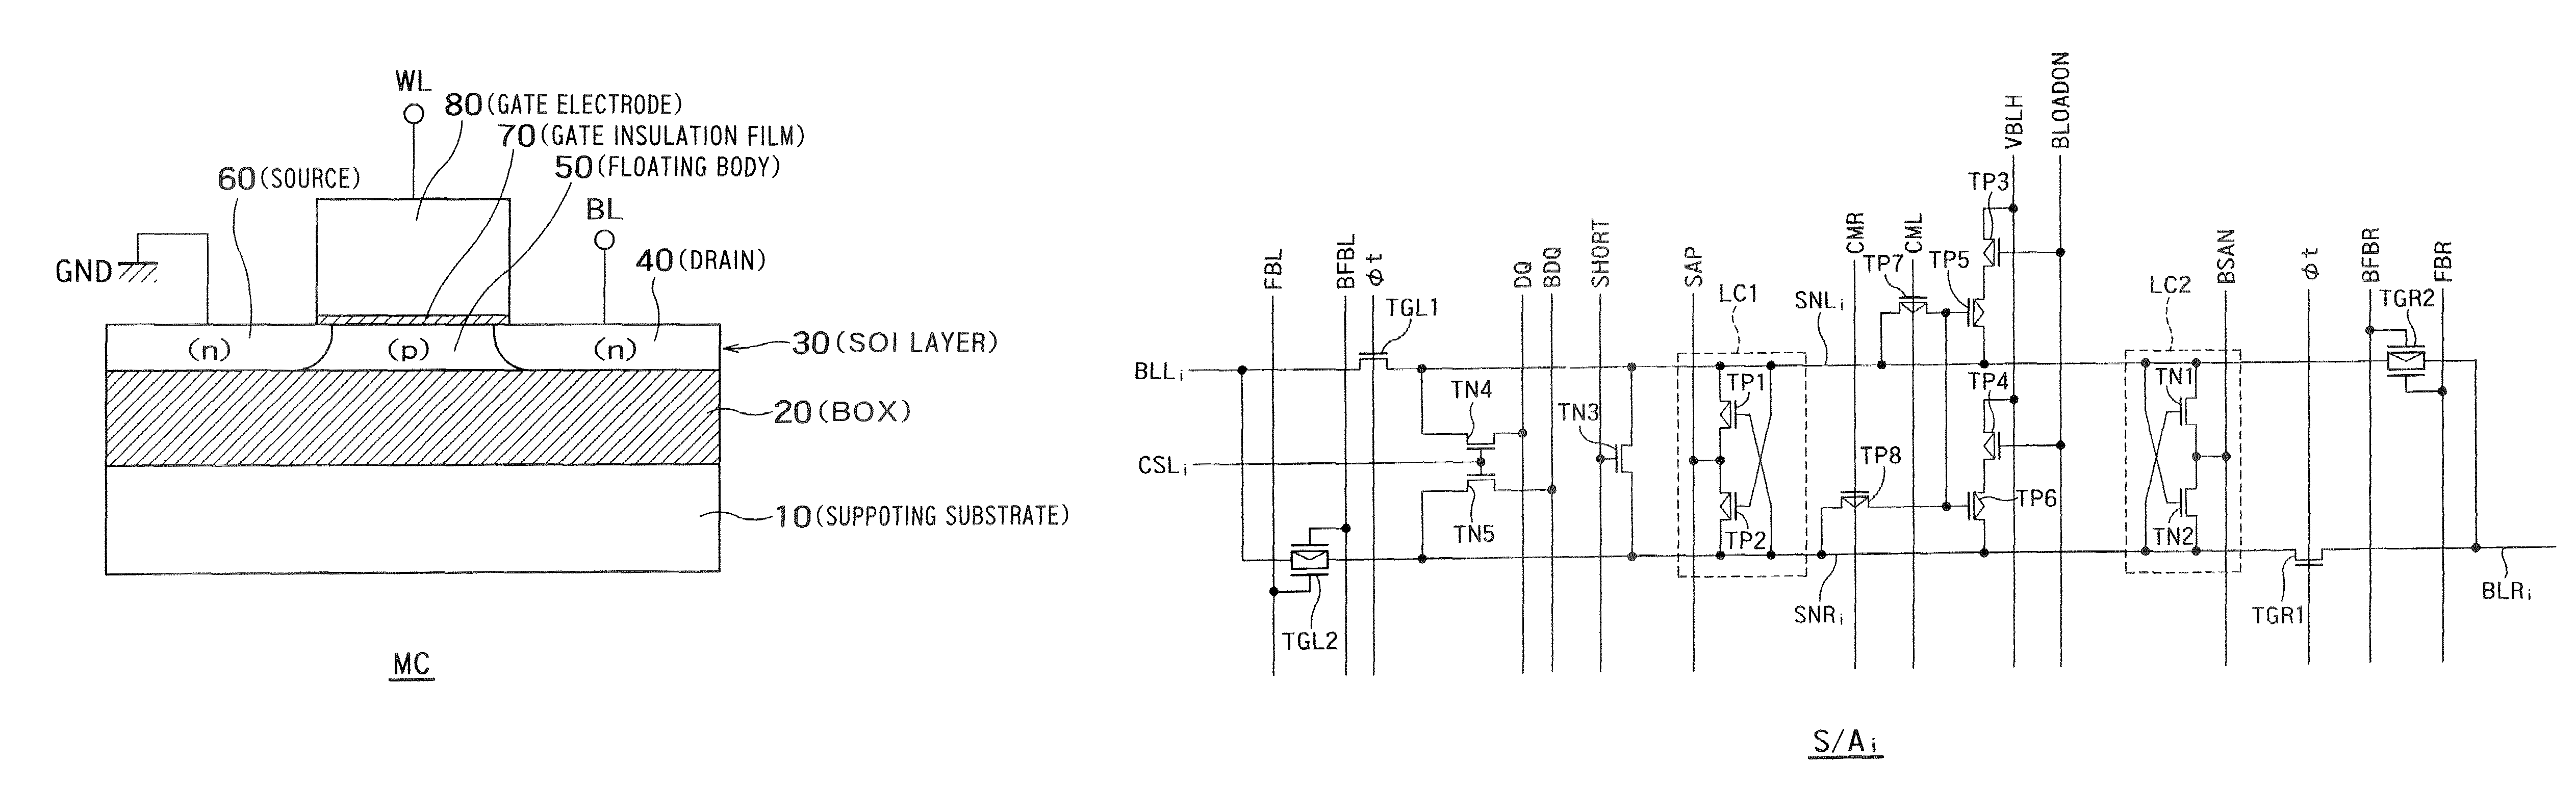 Floating body cell (FBC) memory device with a sense amplifier for refreshing dummy cells